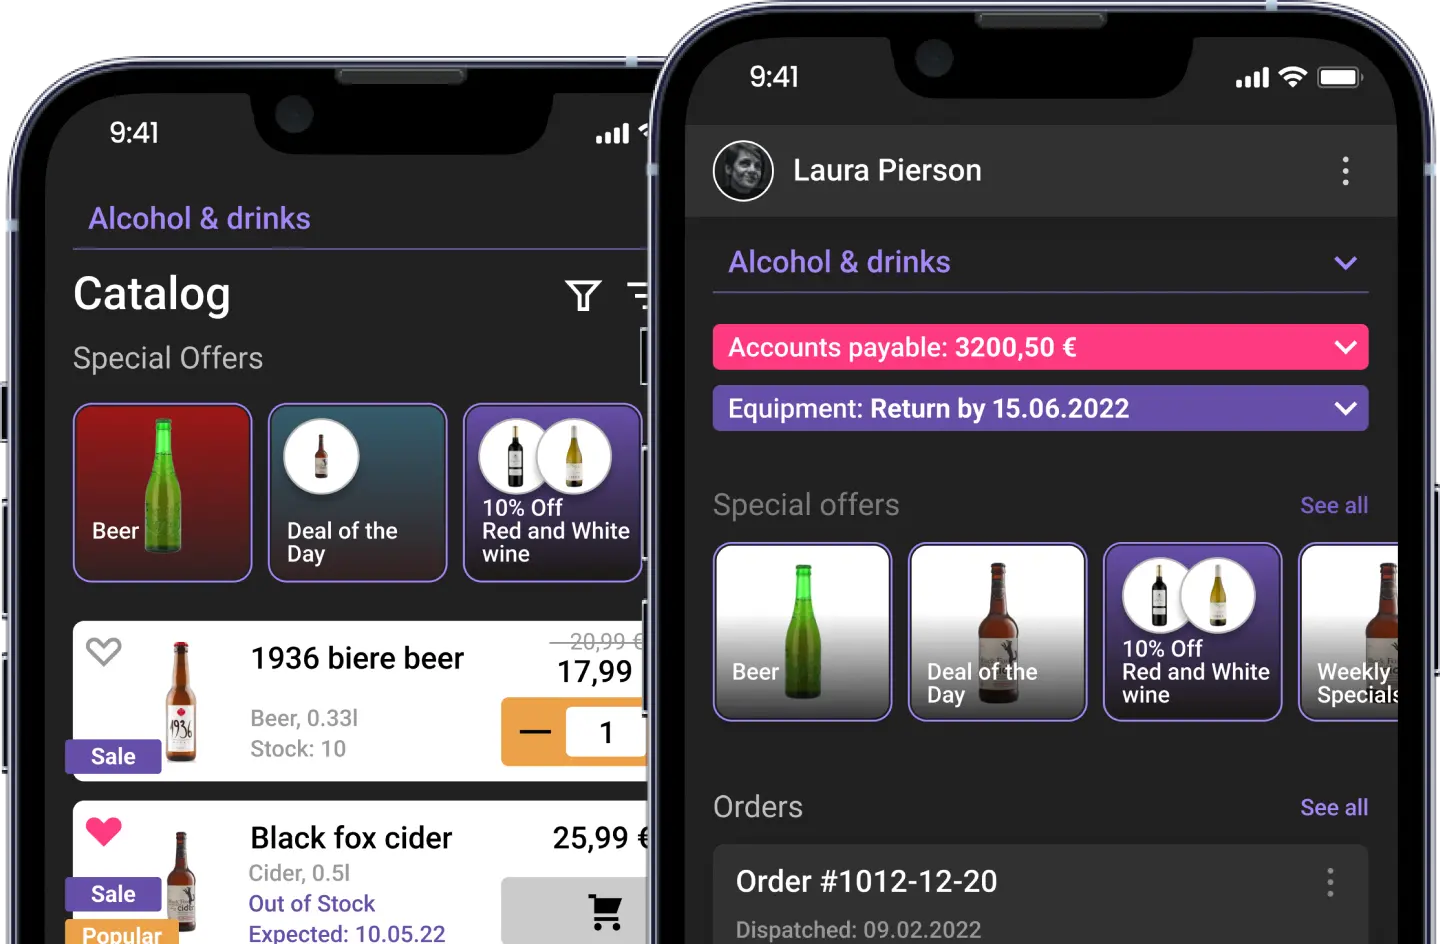 Wines and spirits distribution company simplifies interaction with their customers from the Hospitality industry and small stores with the help of a B2B mobile ordering app.